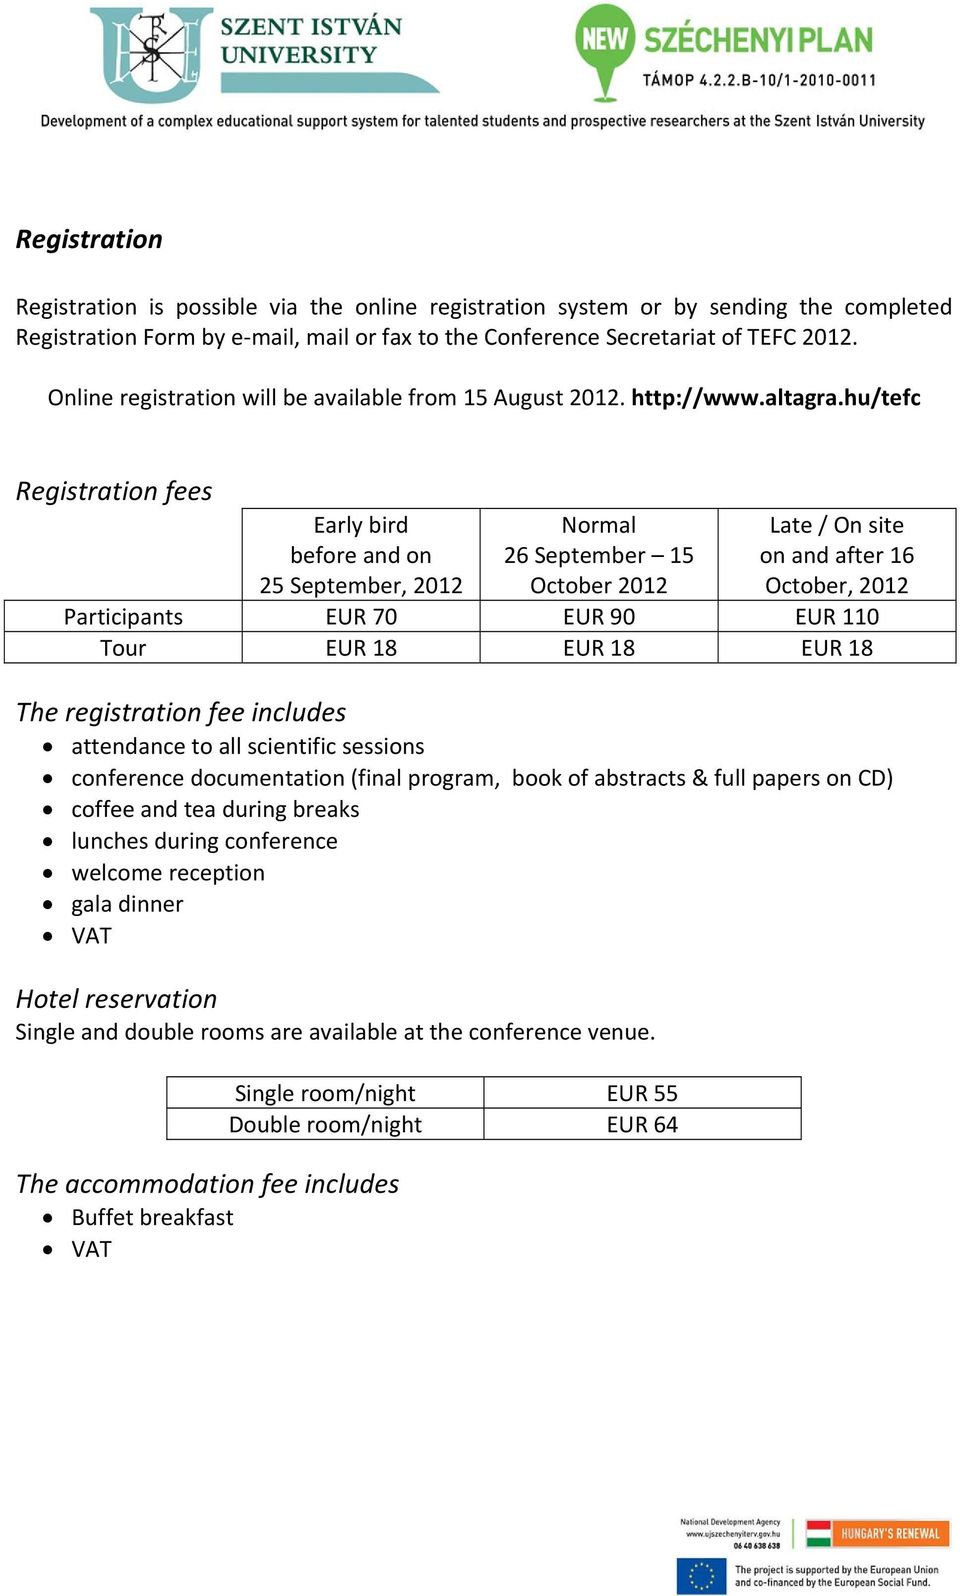 hu/tefc Registration fees Early bird before and on 25 September, 2012 Normal 26 September 15 October 2012 Late / On site on and after 16 October, 2012 Participants EUR 70 EUR 90 EUR 110 Tour EUR 18